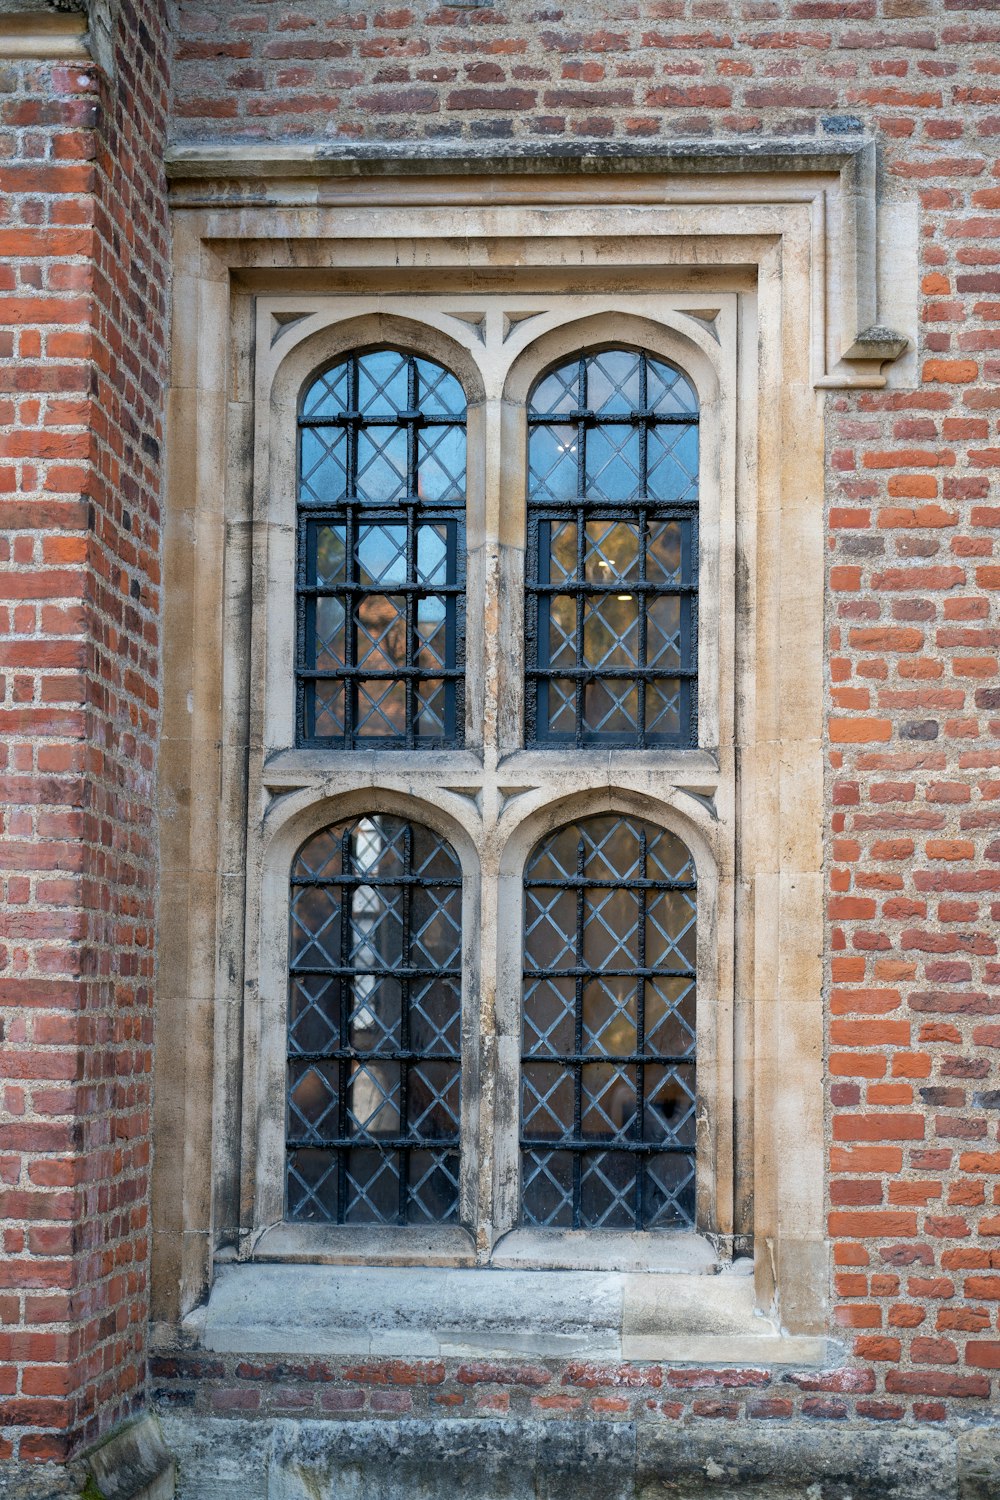 a large window with a bunch of bars on it